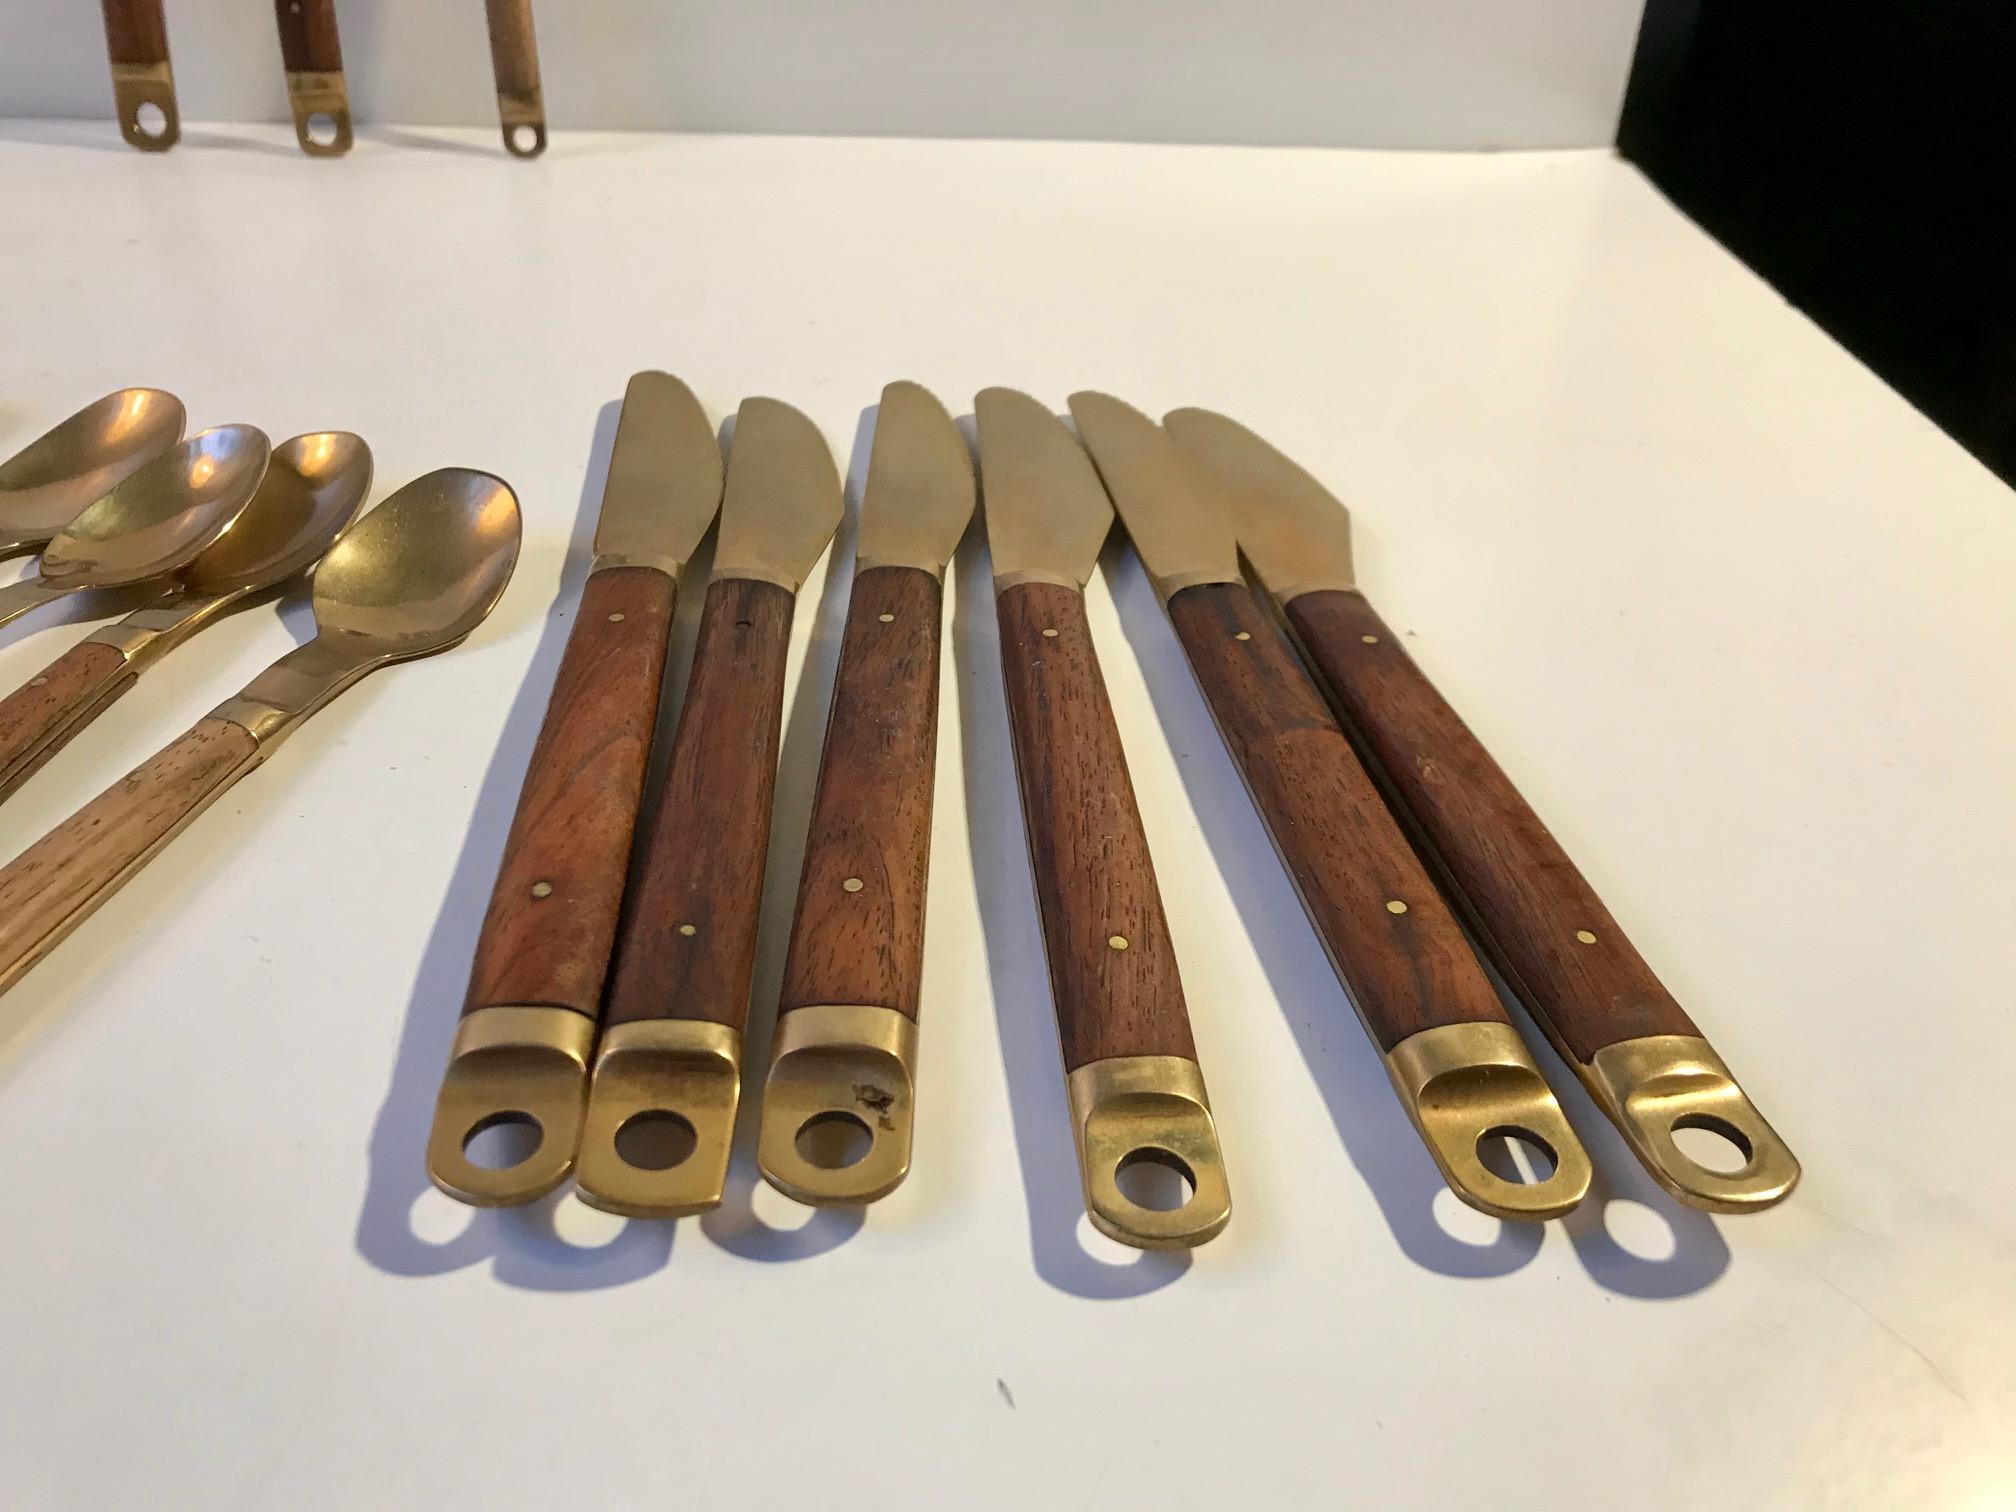 Mid-Century Modern Danish Modern Brass and Teak Cutlery Set from Carl Cohr, 1960s For Sale